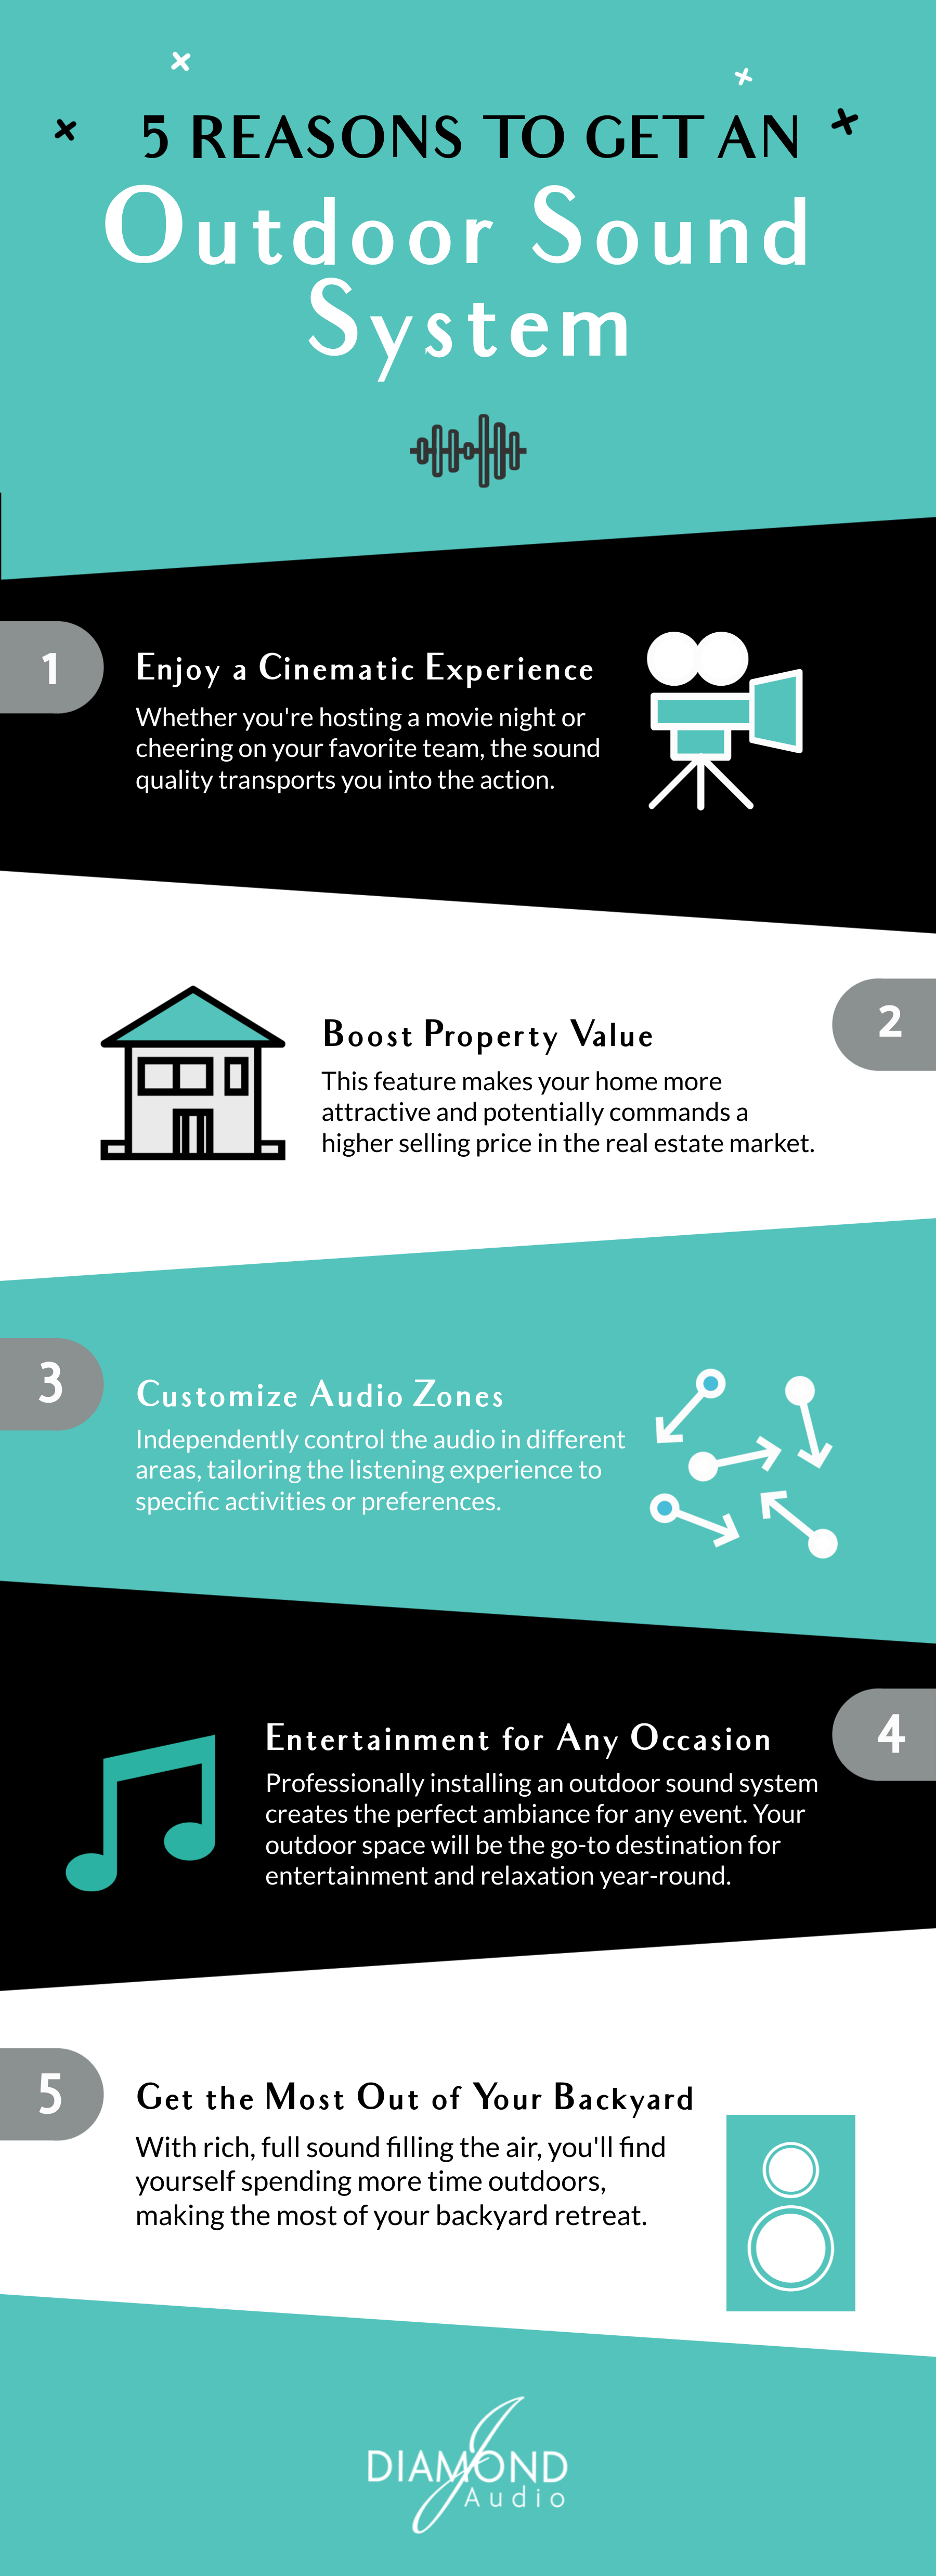 5 Reasons to Get an Outdoor Sound System Diamond J Audio Infographic